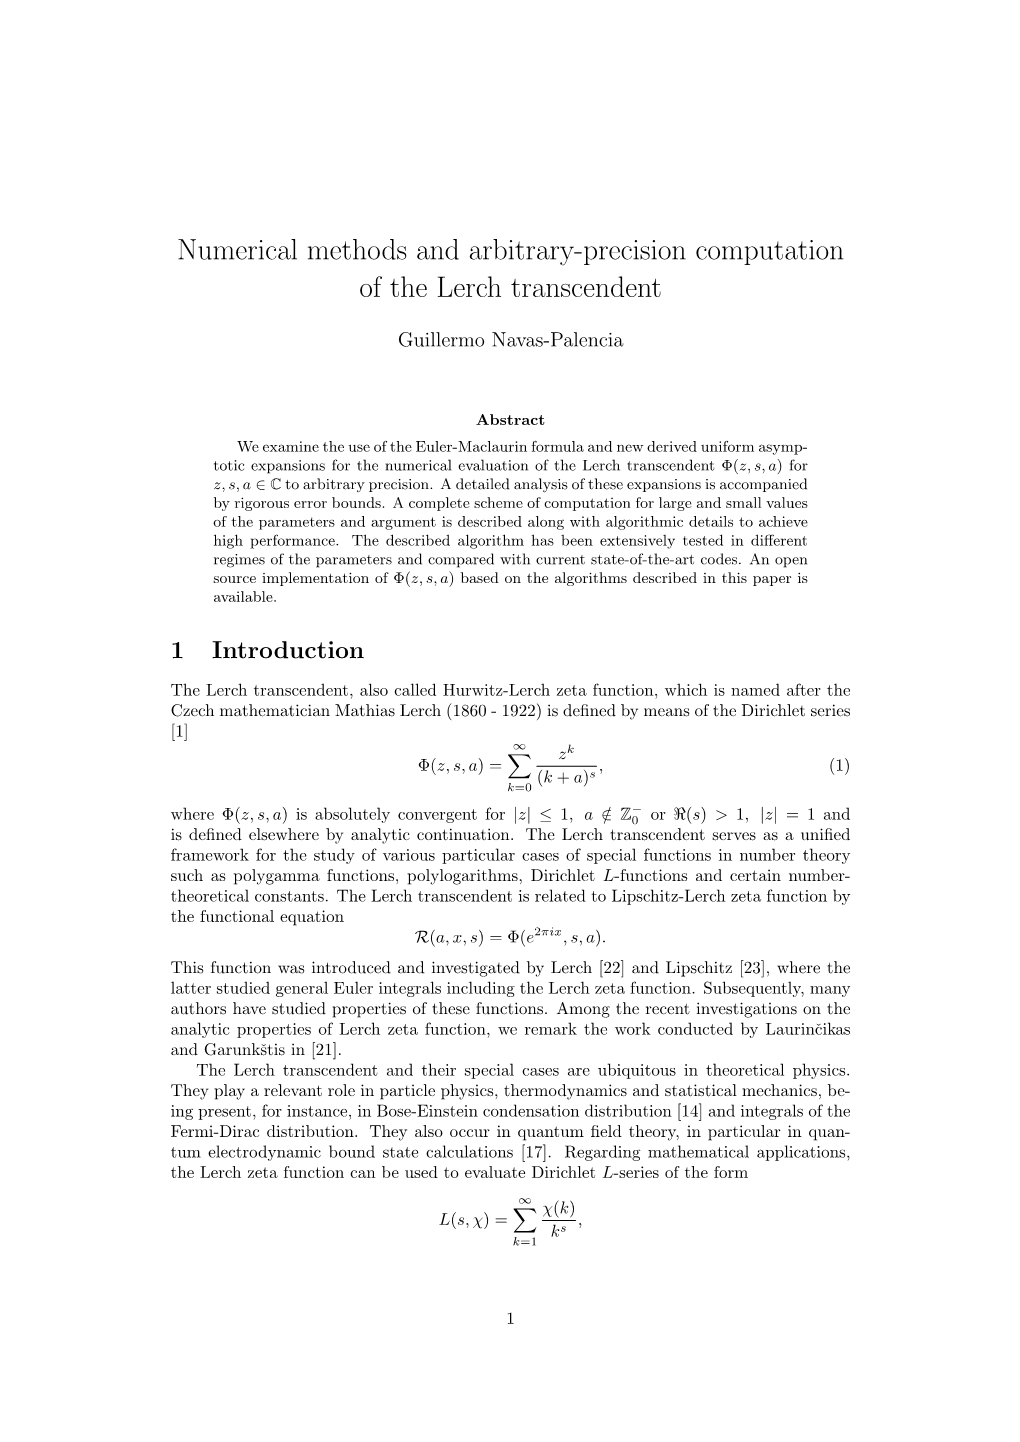 Numerical Methods and Arbitrary-Precision Computation of the Lerch Transcendent